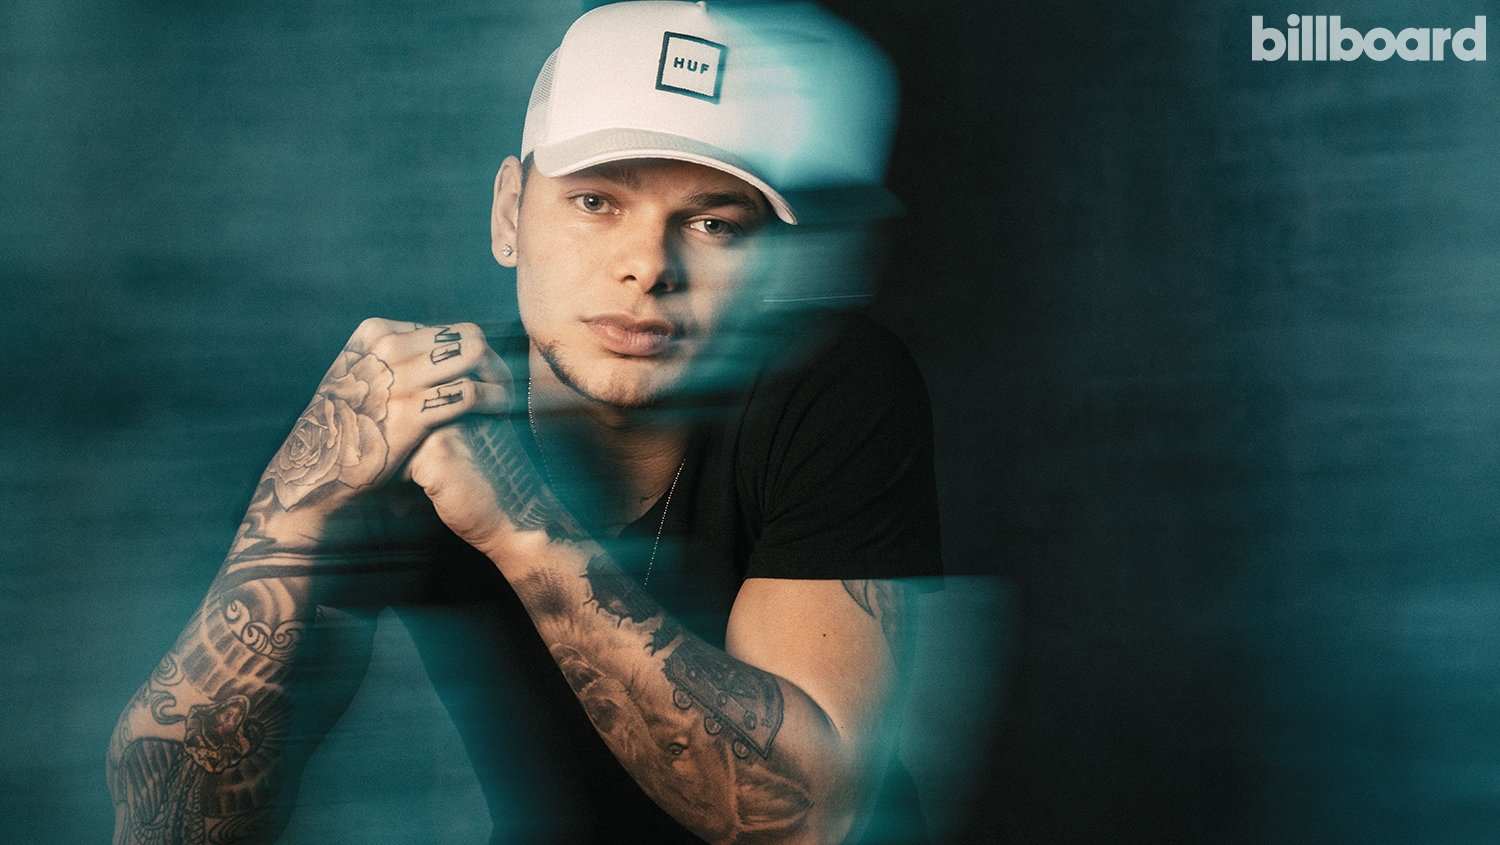 How Kane Brown Overcame Poverty and Prejudice To Become The Biggest New Thing in Country